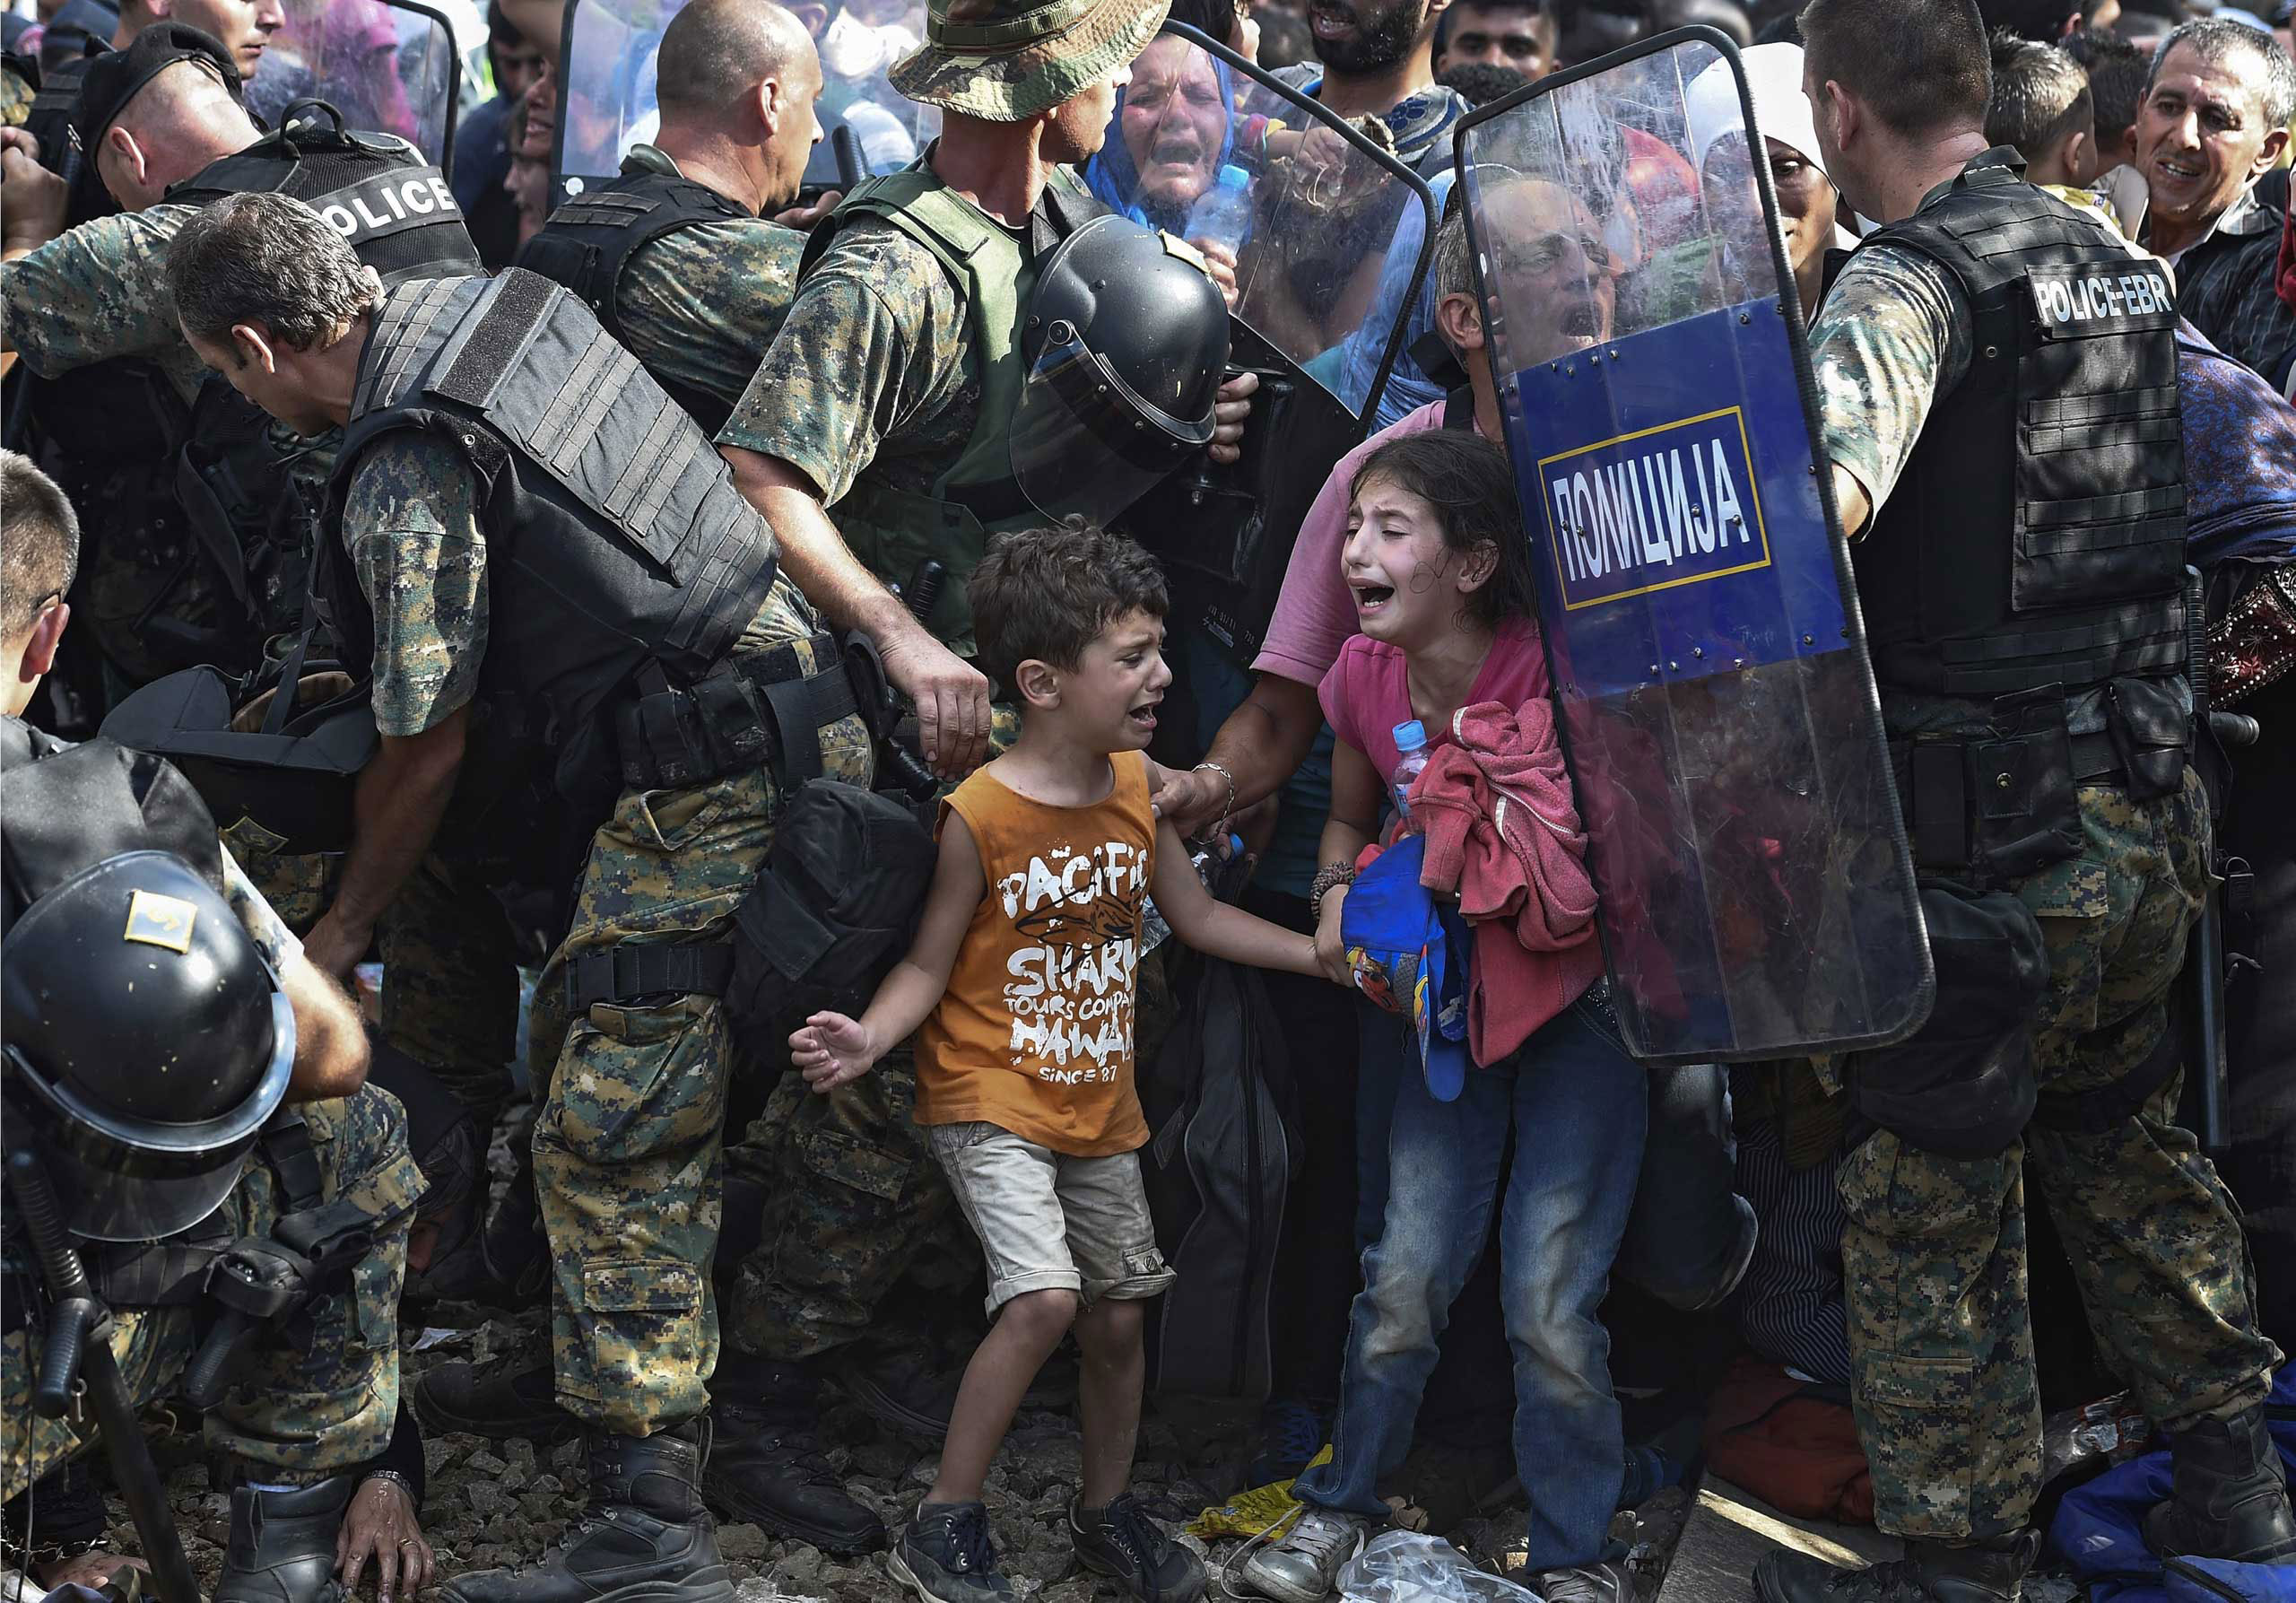 Children cry as migrants waiting on the Greek side of the border break through a cordon of Macedonian special police forces to cross into Macedonia, near the southern city of Gevgelija, The Former Yugoslav Republic of Macedonia. Aug. 21, 2015.